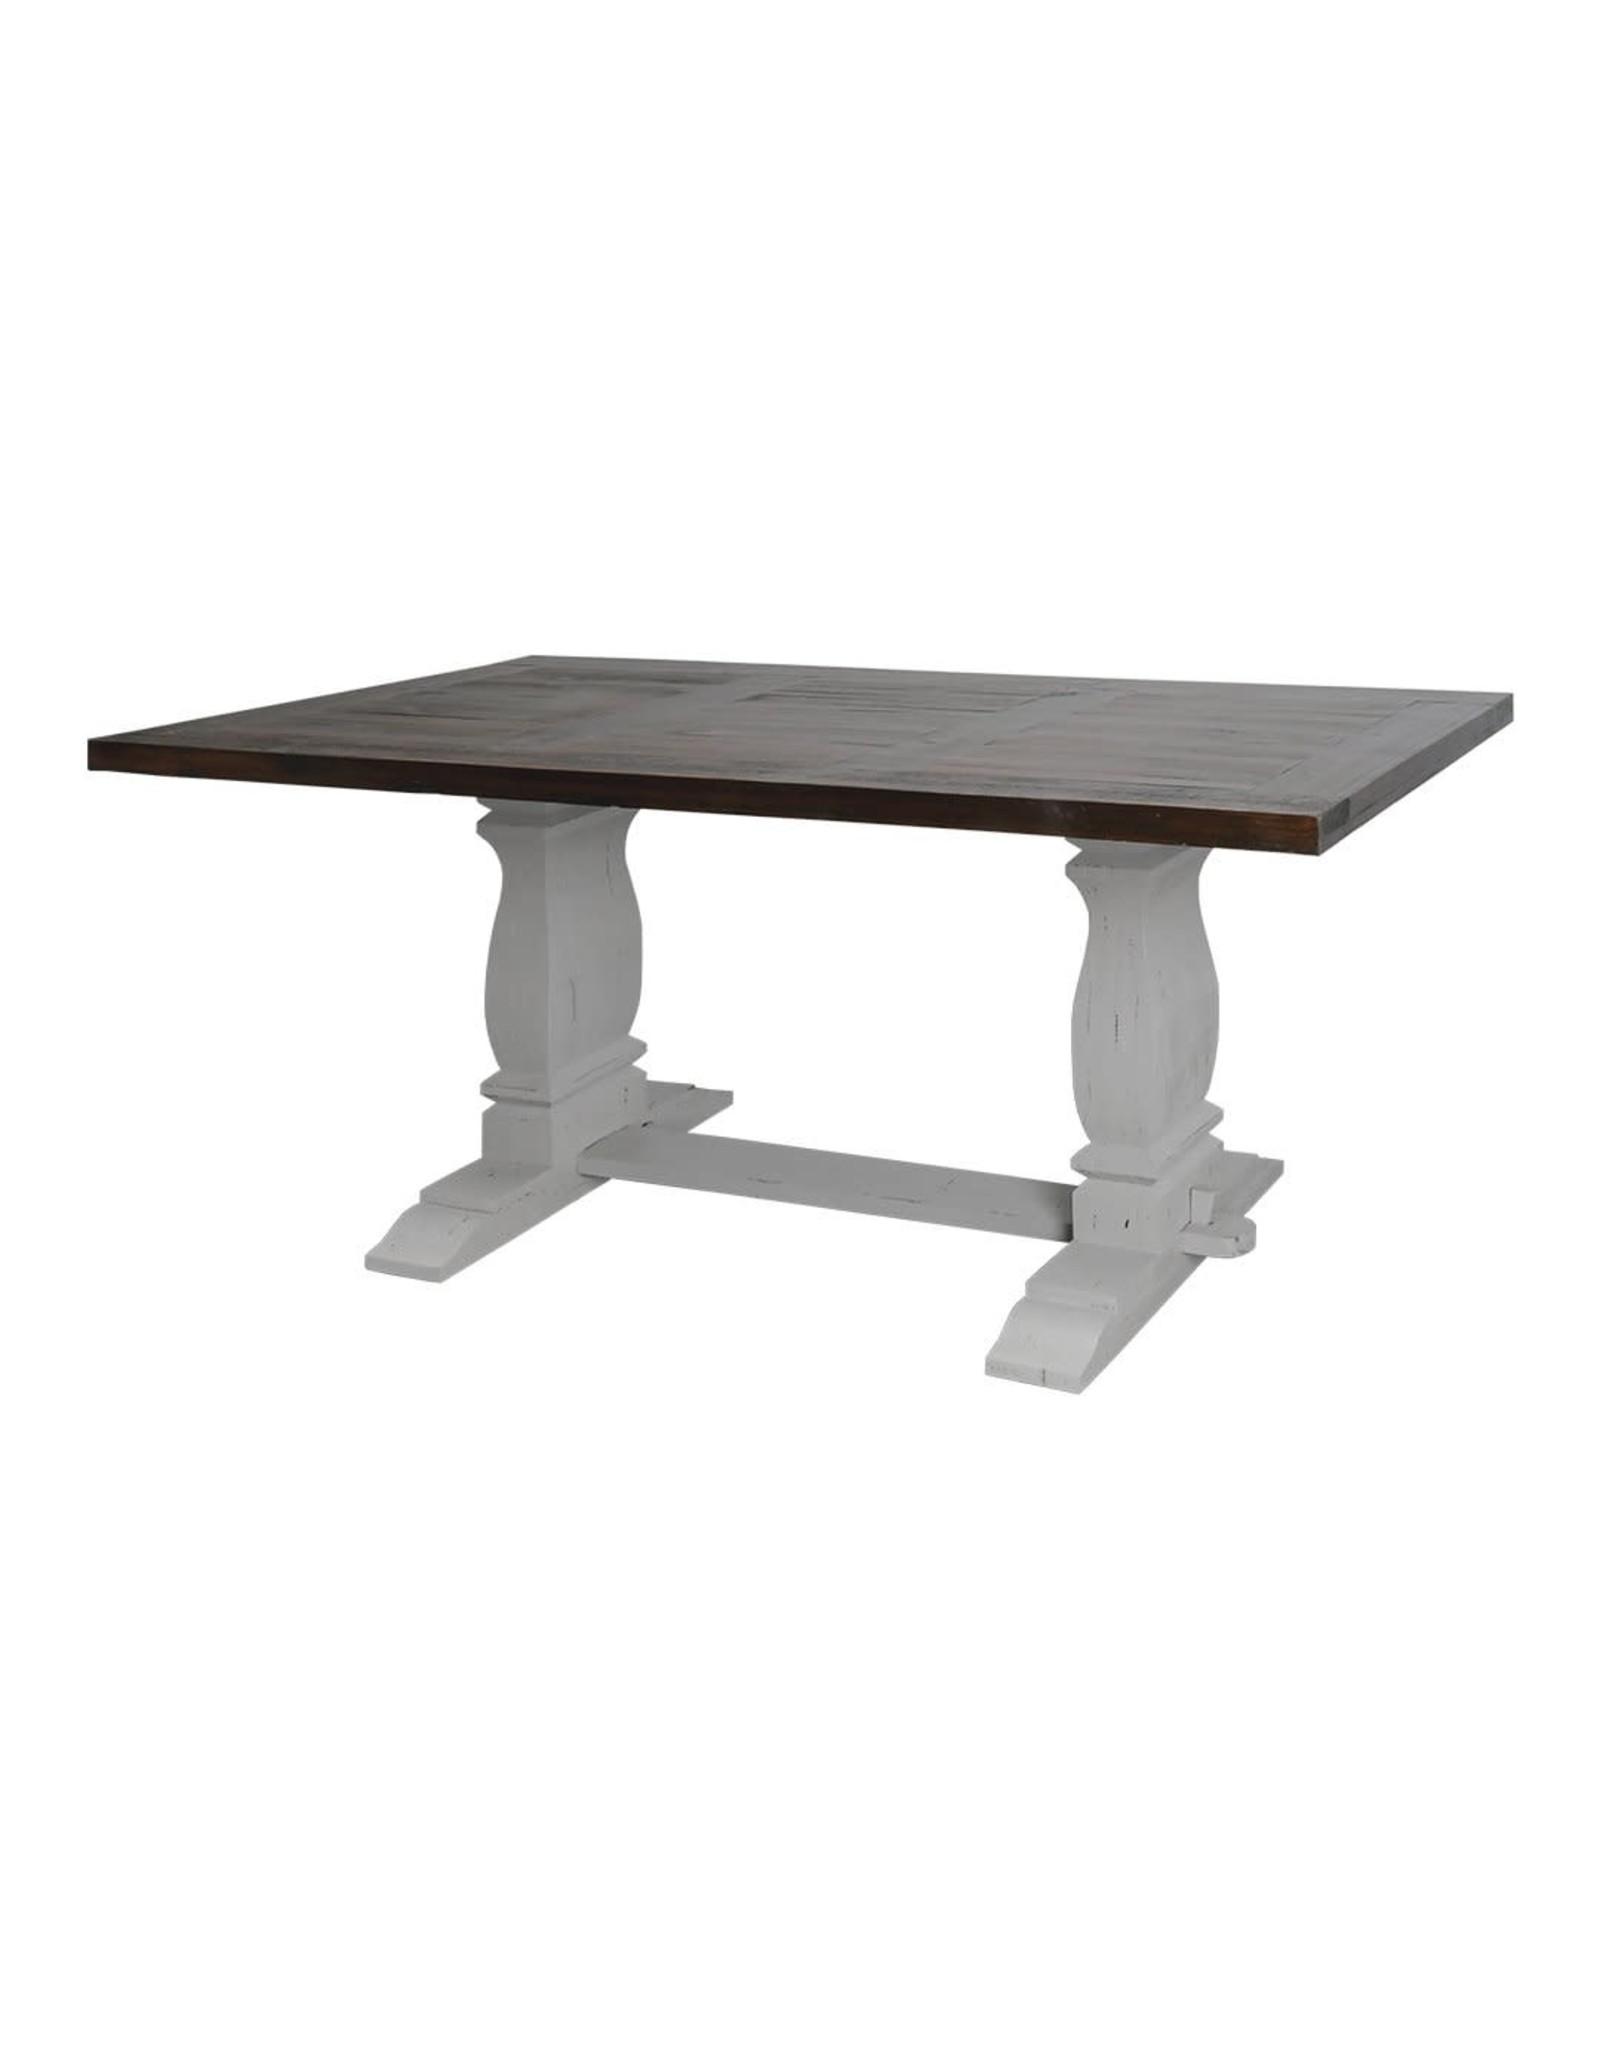 MES 2 Dining Table Tressel 72X40X31